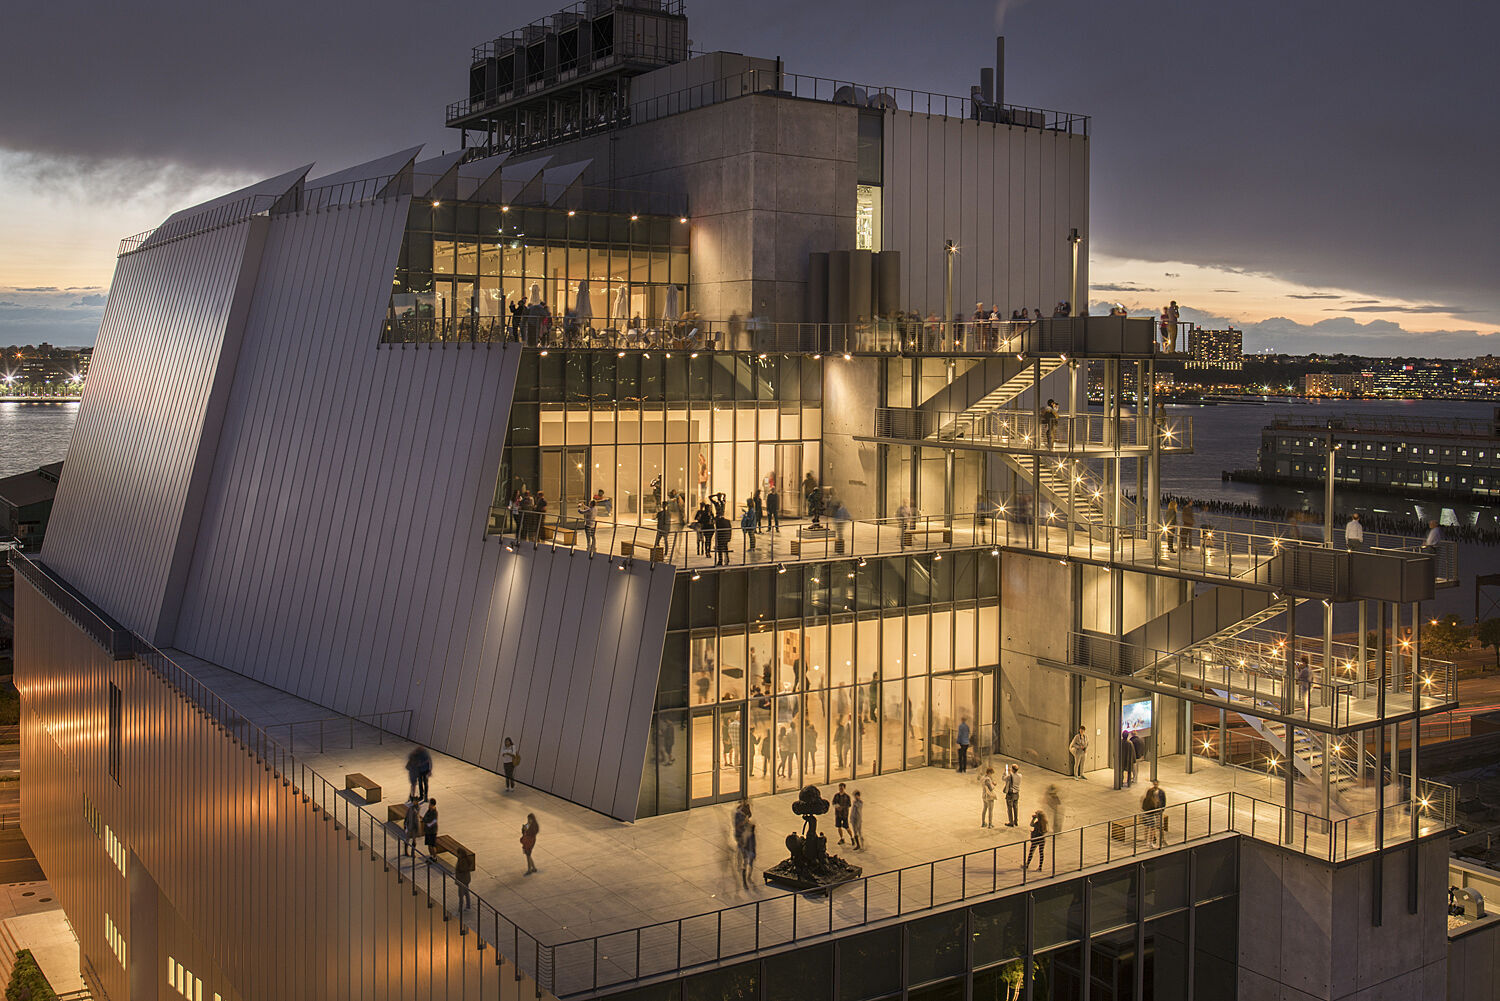 THE WHITNEY MUSEUM OF AMERICAN ART